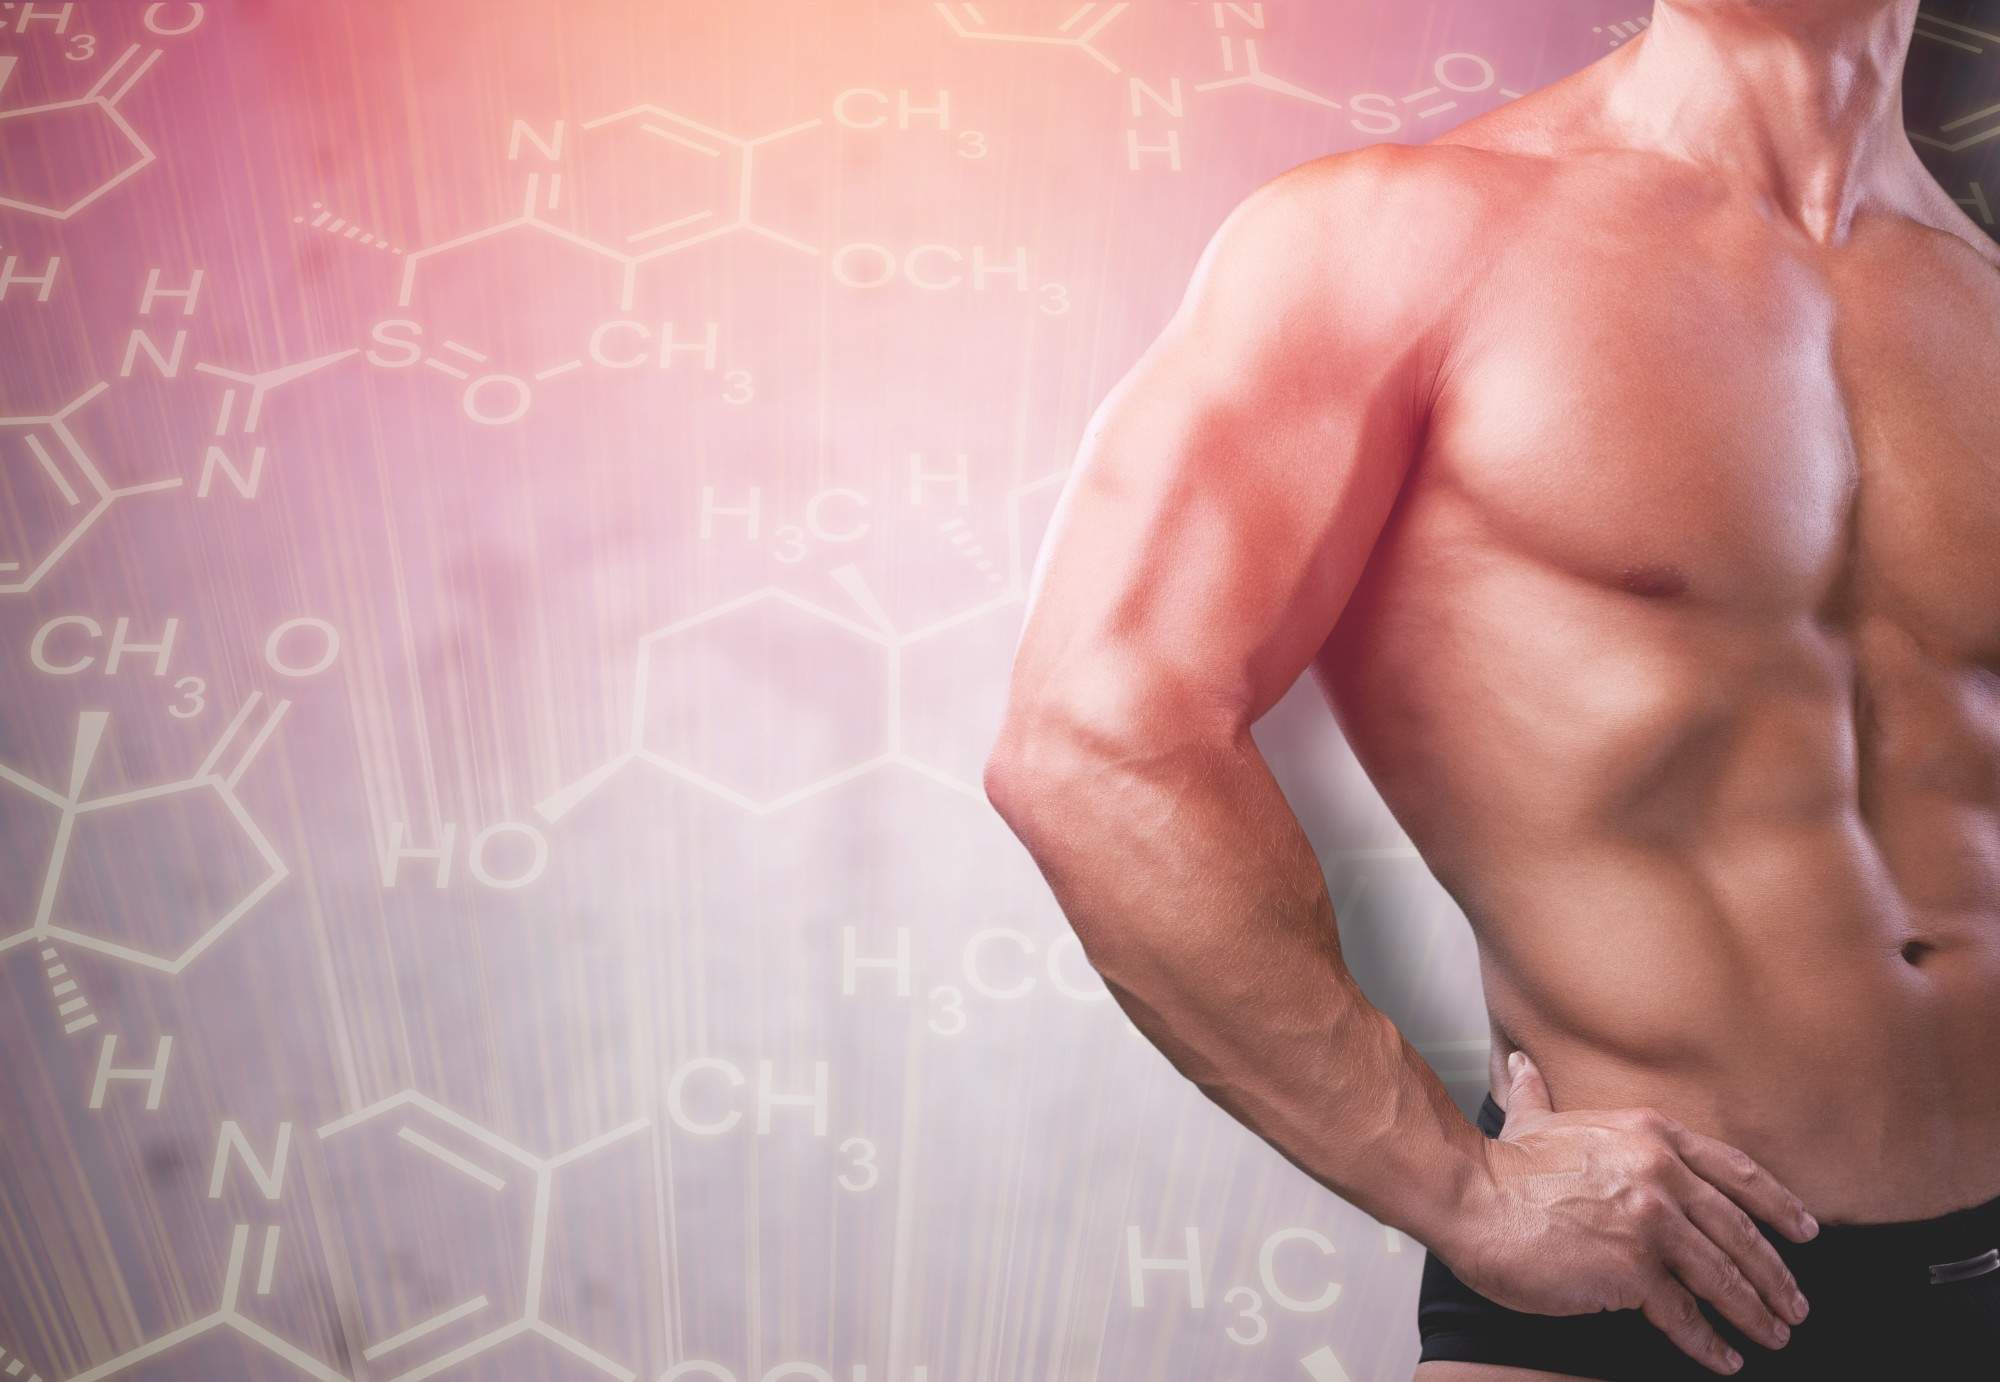 A Controversial Fitness Supplement in Review: Are SARMS Steroids?